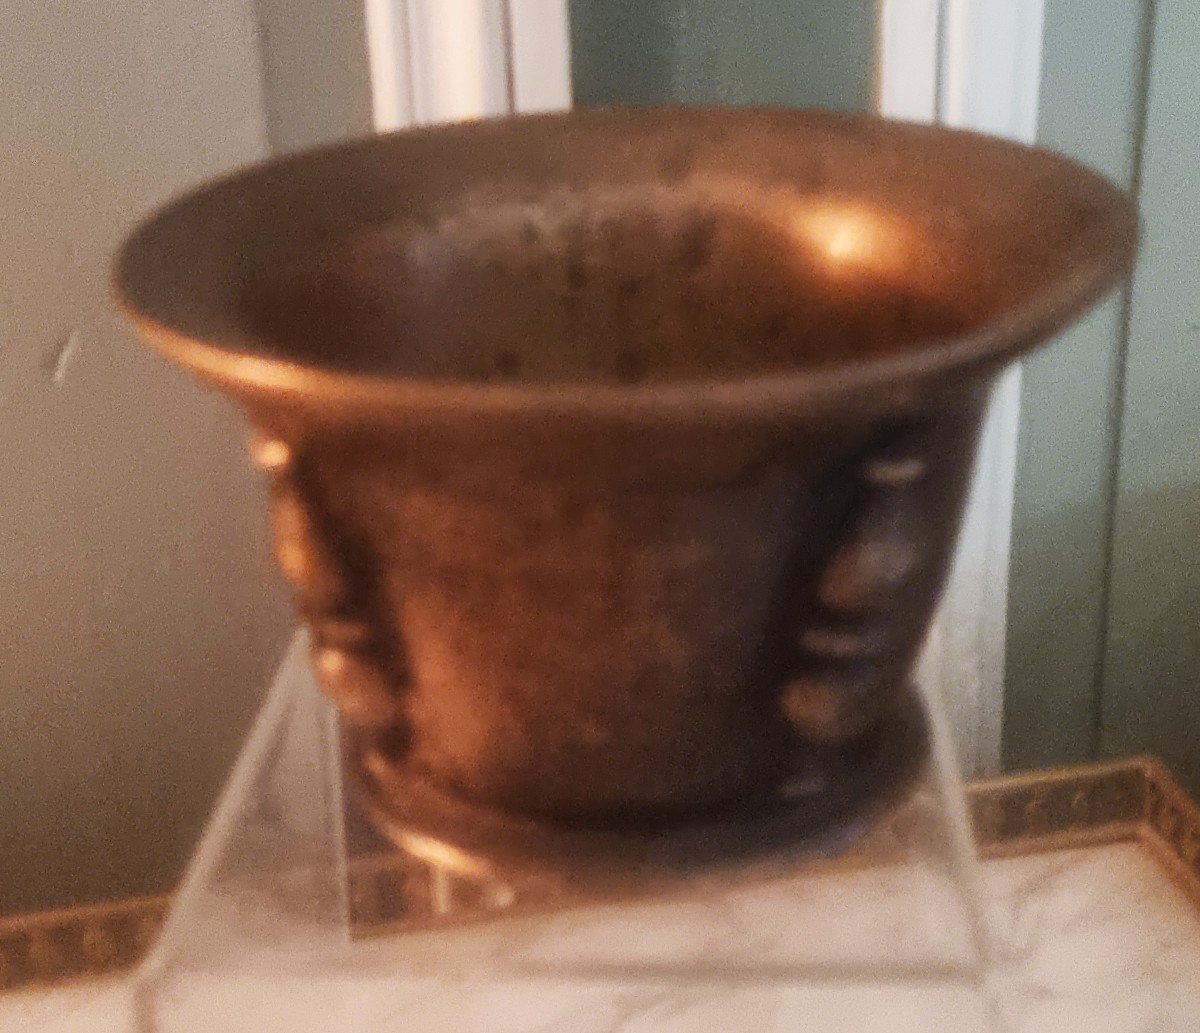 Bronze Mortar Decorated With Balusters 18th Century